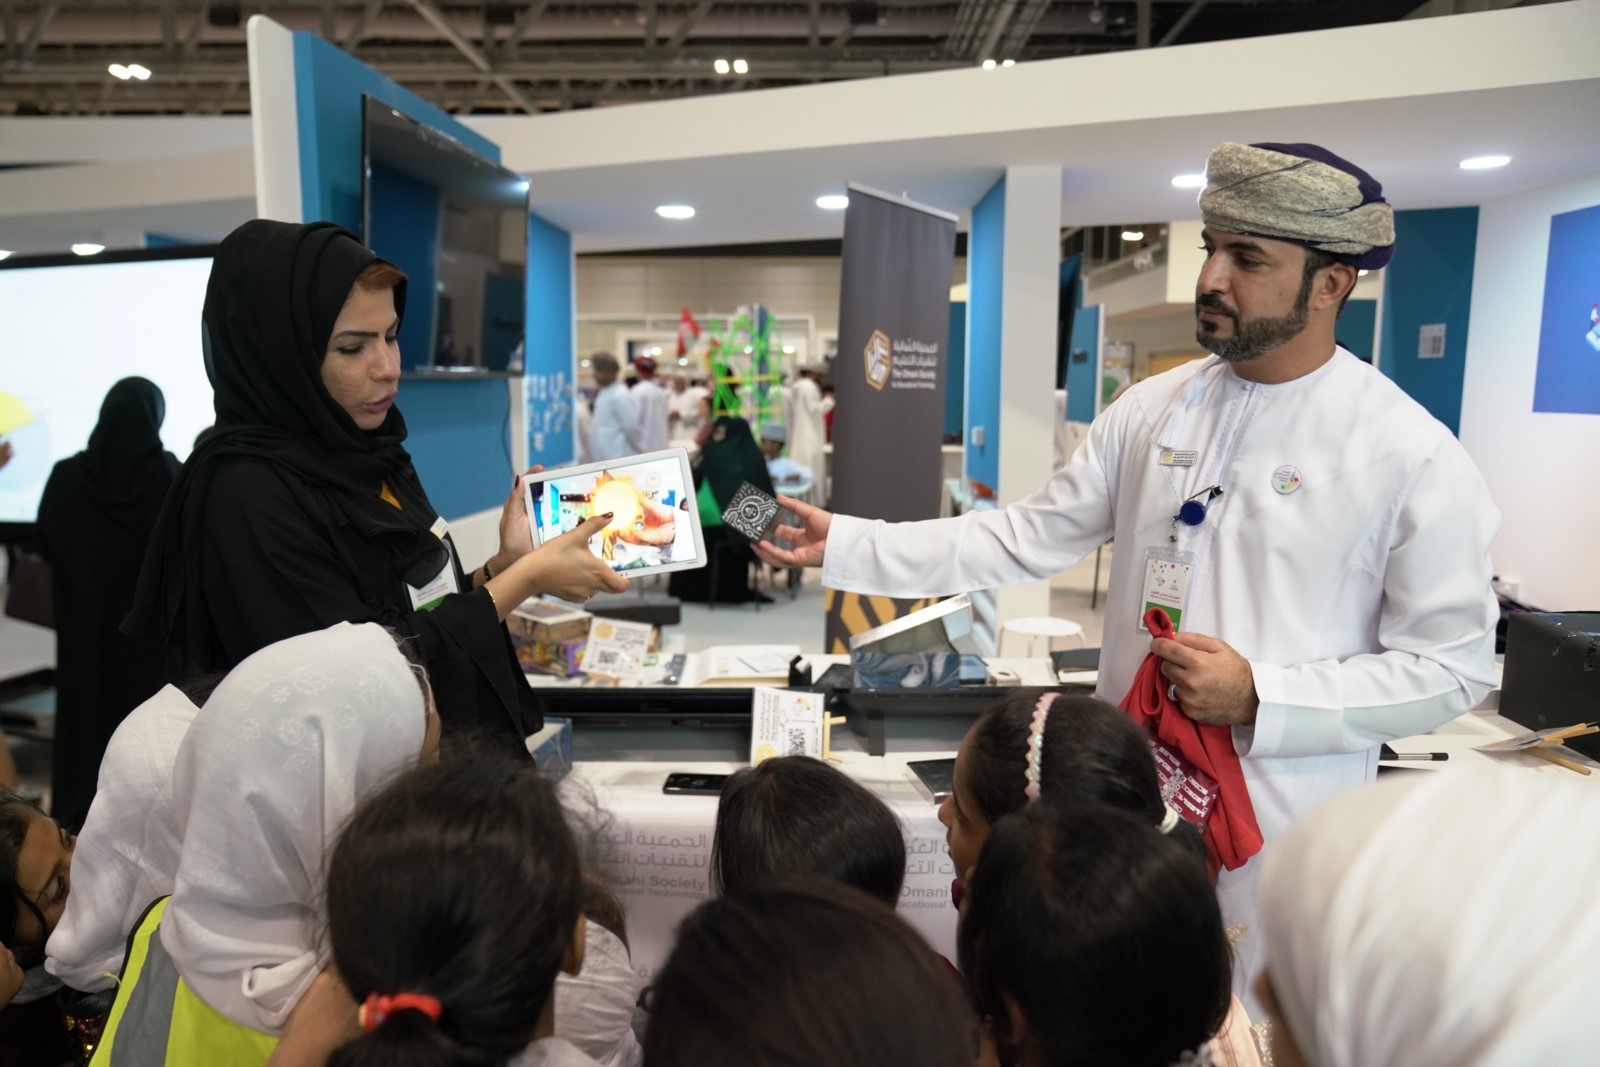 Oman Science Festival 2019 showcases robot competitions, hackathons